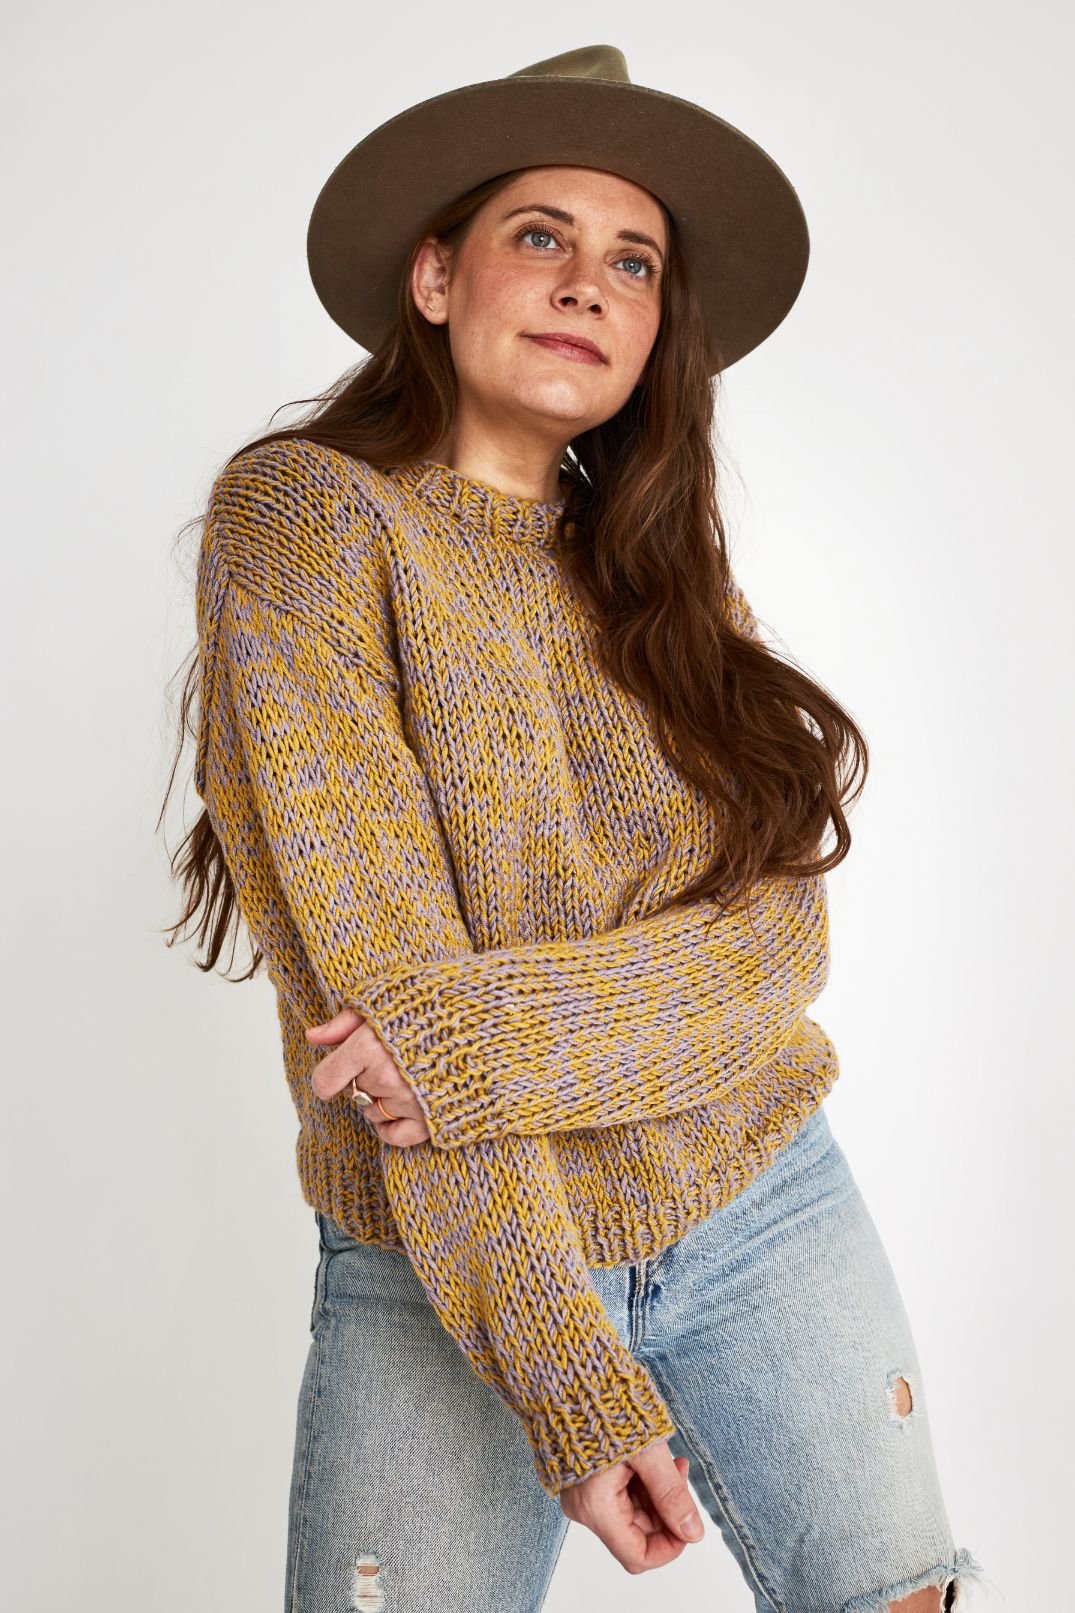 Kenwood Sweater FREE Knitting Pattern in Color Theory — of